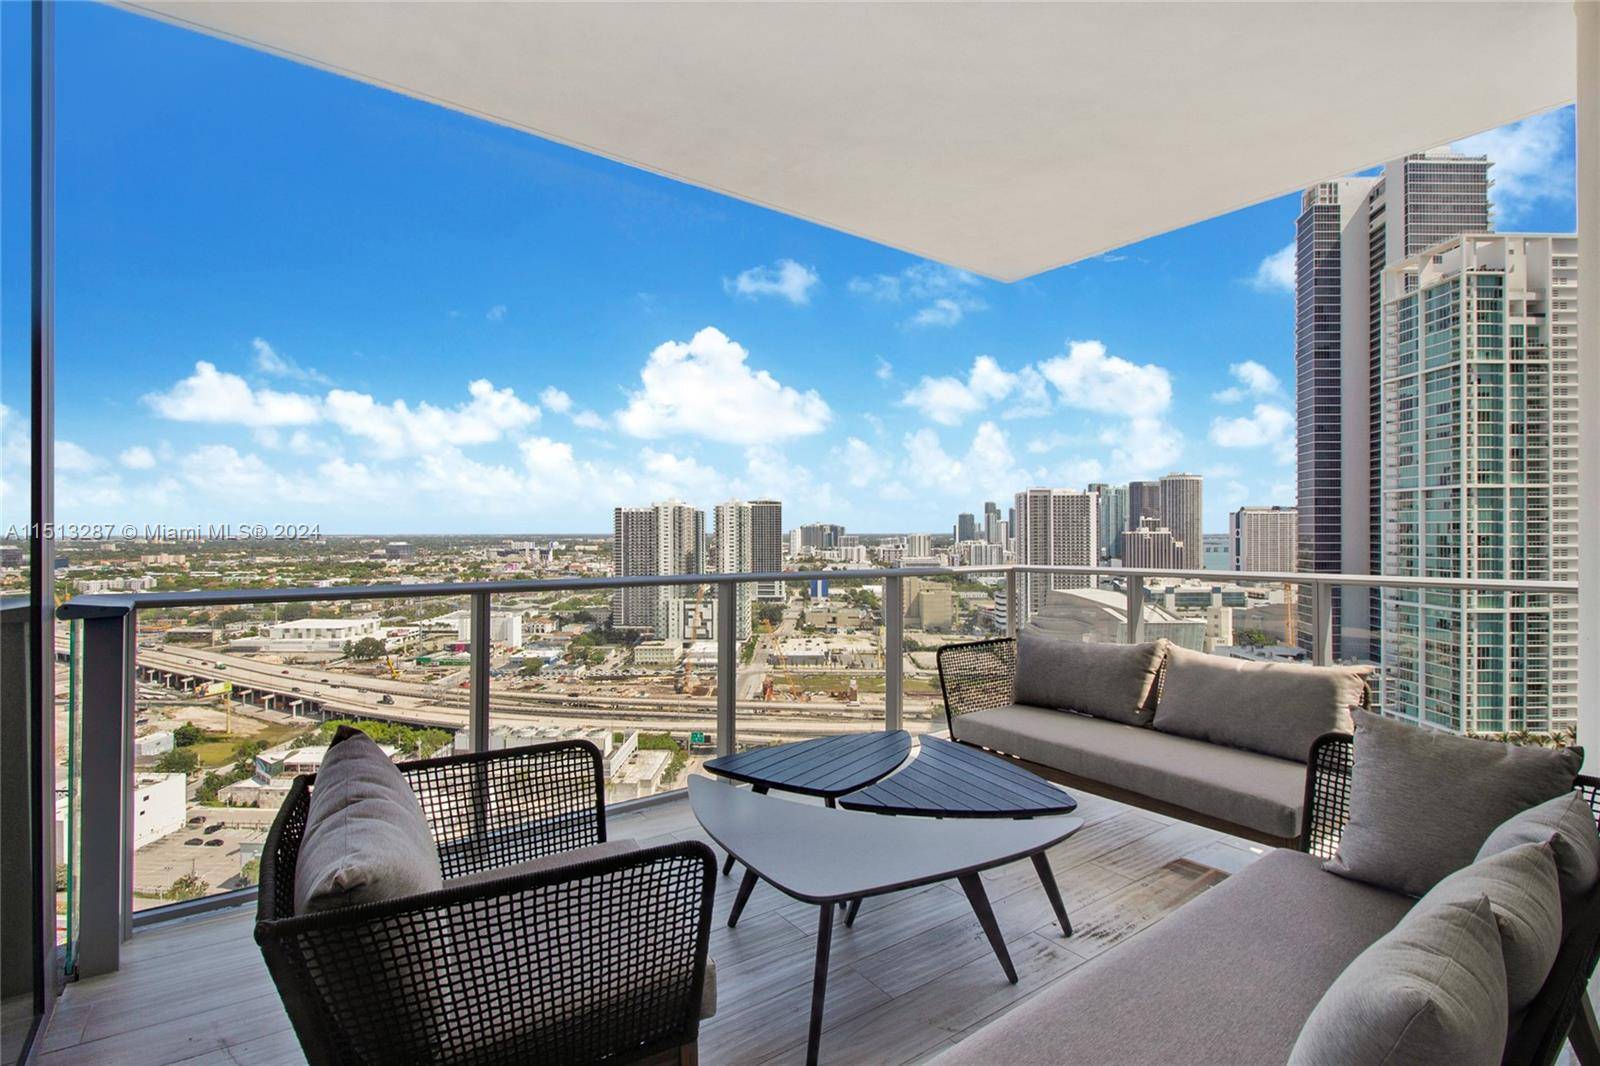 This 3BD Den 4 BA Fully Furnished by a professional NY interior designer at luxury at PARAMOUNT Miami Worldcenter located in vibrant Downtown Miami.